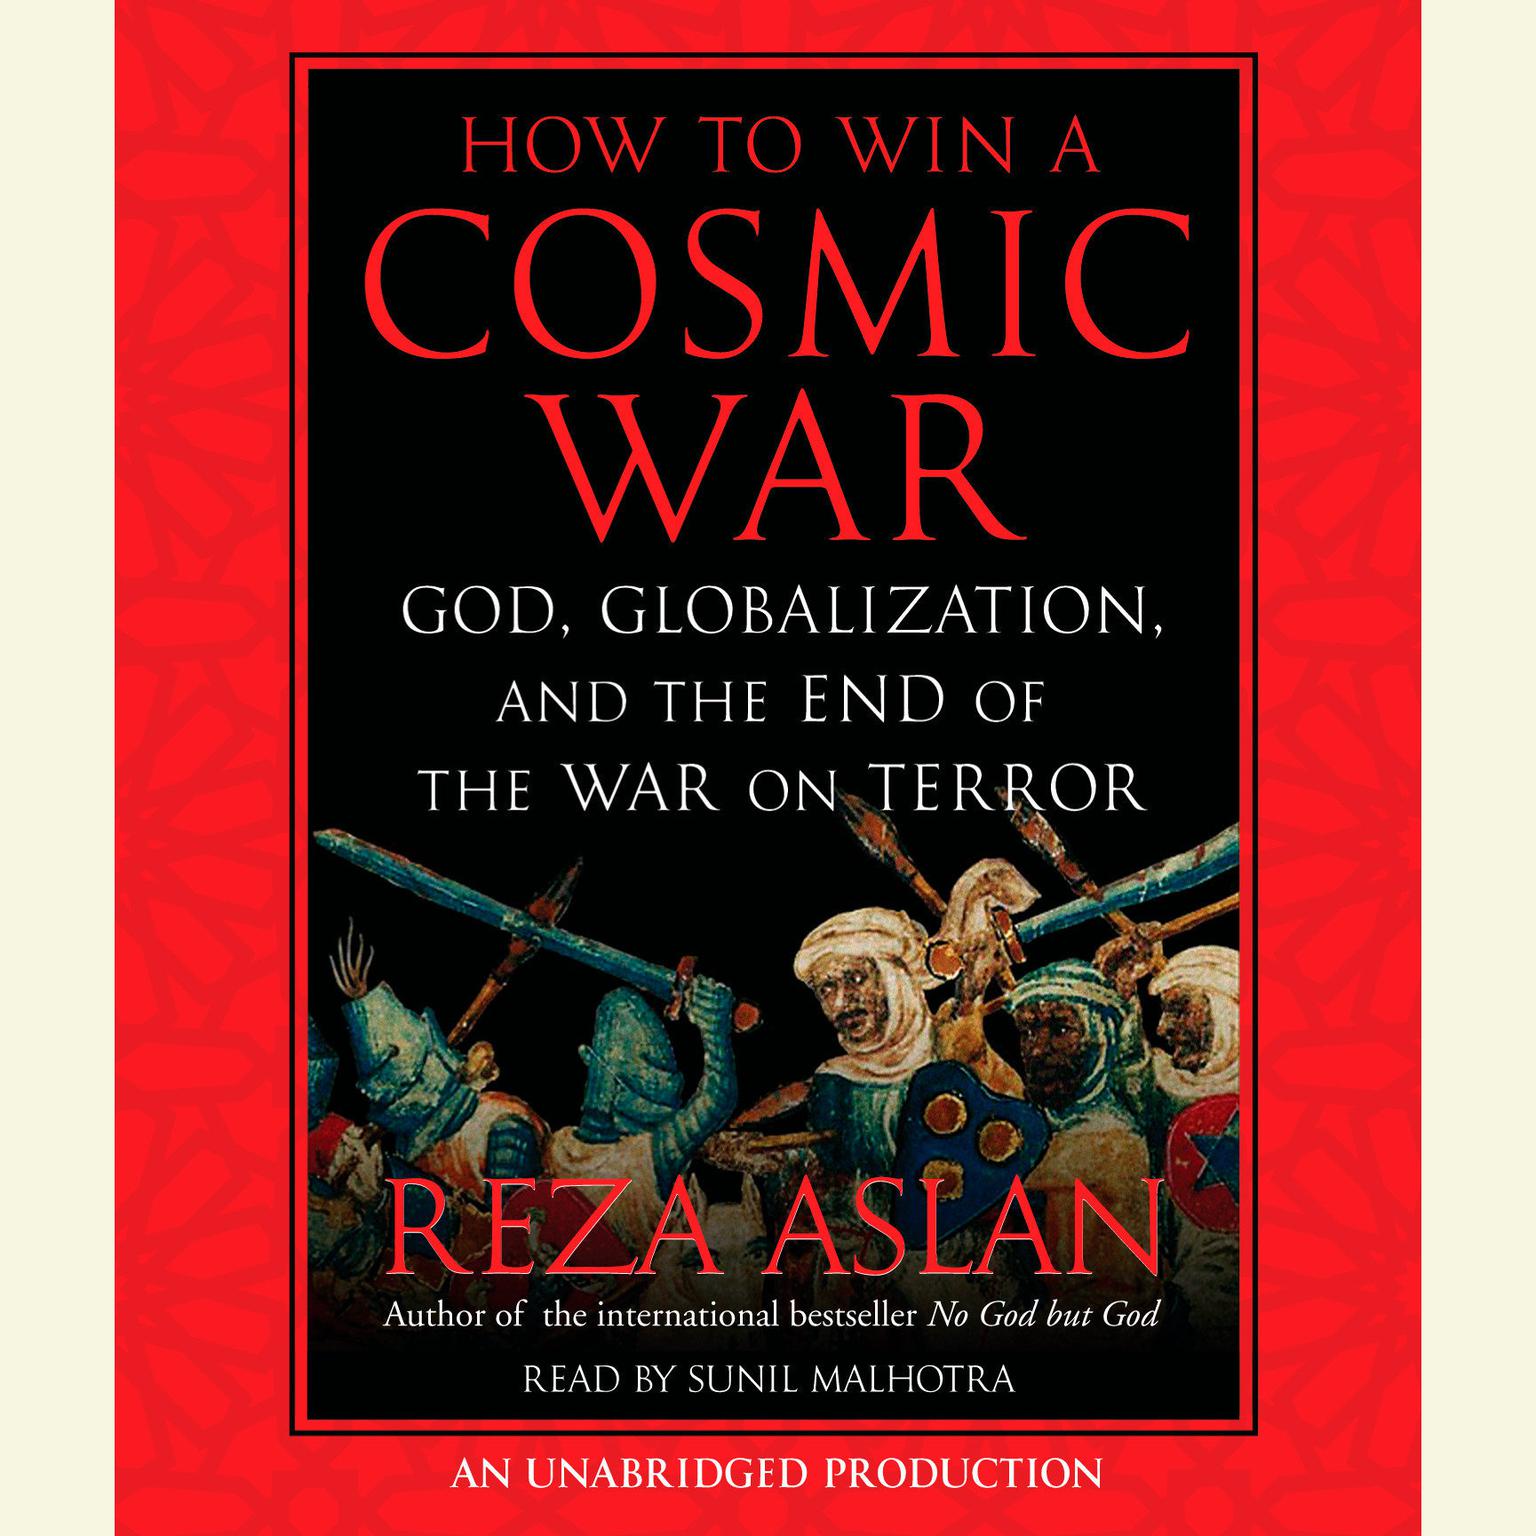 How to Win a Cosmic War: God, Globalization, and the End of the War on Terror Audiobook, by Reza Aslan